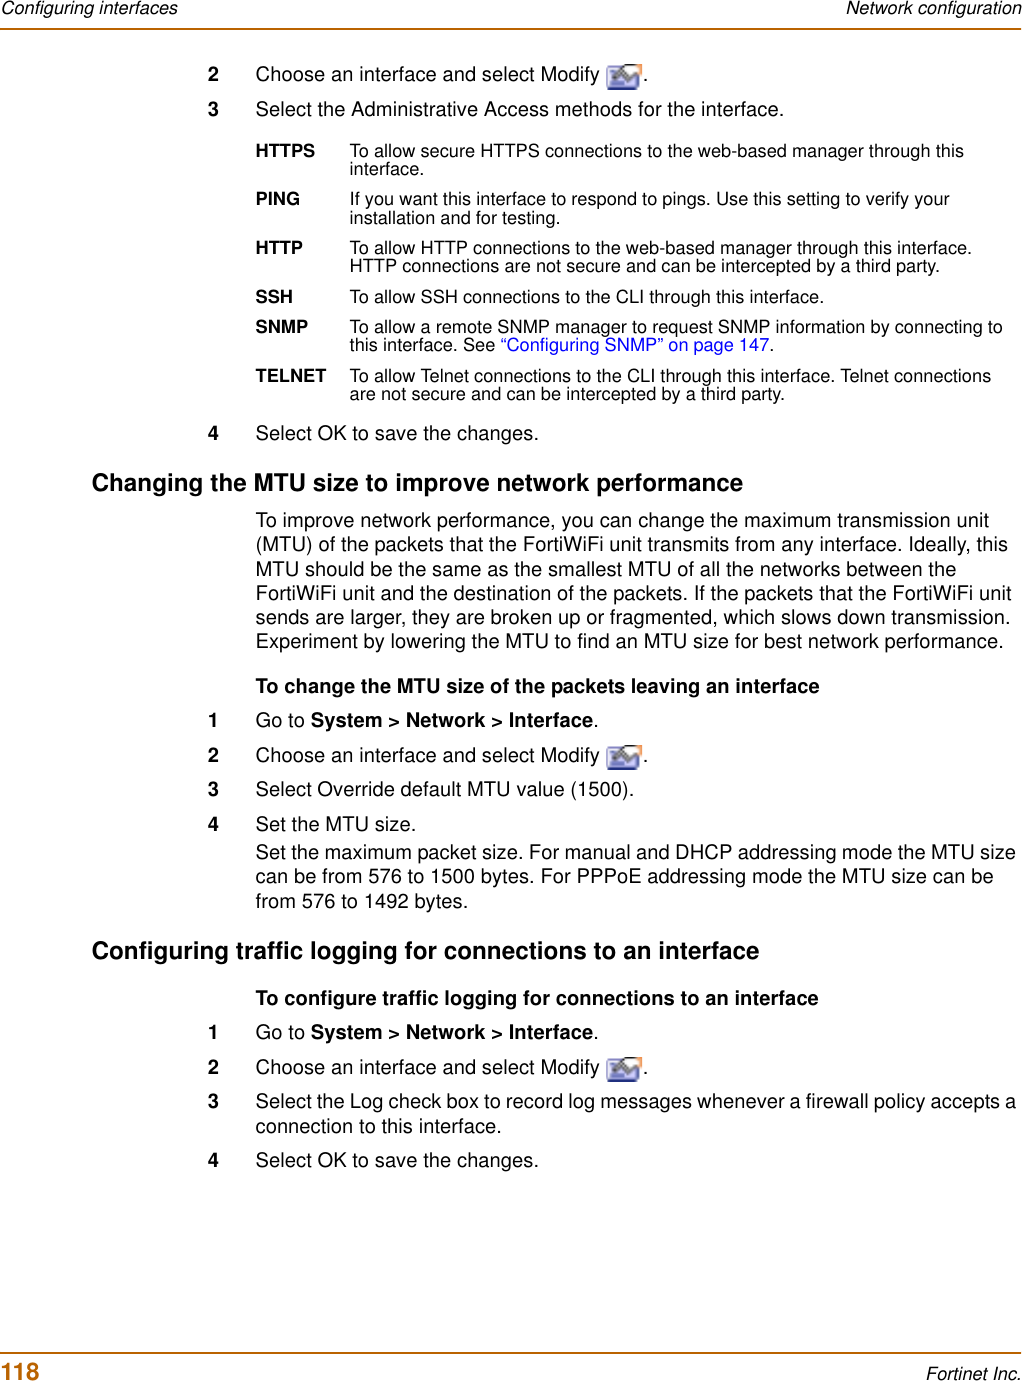 118 Fortinet Inc.Configuring interfaces Network configuration2Choose an interface and select Modify  .3Select the Administrative Access methods for the interface.4Select OK to save the changes.Changing the MTU size to improve network performanceTo improve network performance, you can change the maximum transmission unit (MTU) of the packets that the FortiWiFi unit transmits from any interface. Ideally, this MTU should be the same as the smallest MTU of all the networks between the FortiWiFi unit and the destination of the packets. If the packets that the FortiWiFi unit sends are larger, they are broken up or fragmented, which slows down transmission. Experiment by lowering the MTU to find an MTU size for best network performance.To change the MTU size of the packets leaving an interface1Go to System &gt; Network &gt; Interface.2Choose an interface and select Modify  .3Select Override default MTU value (1500).4Set the MTU size.Set the maximum packet size. For manual and DHCP addressing mode the MTU size can be from 576 to 1500 bytes. For PPPoE addressing mode the MTU size can be from 576 to 1492 bytes.Configuring traffic logging for connections to an interfaceTo configure traffic logging for connections to an interface1Go to System &gt; Network &gt; Interface.2Choose an interface and select Modify  .3Select the Log check box to record log messages whenever a firewall policy accepts a connection to this interface.4Select OK to save the changes.HTTPS To allow secure HTTPS connections to the web-based manager through this interface.PING If you want this interface to respond to pings. Use this setting to verify your installation and for testing.HTTP To allow HTTP connections to the web-based manager through this interface. HTTP connections are not secure and can be intercepted by a third party.SSH To allow SSH connections to the CLI through this interface.SNMP To allow a remote SNMP manager to request SNMP information by connecting to this interface. See “Configuring SNMP” on page 147.TELNET To allow Telnet connections to the CLI through this interface. Telnet connections are not secure and can be intercepted by a third party.